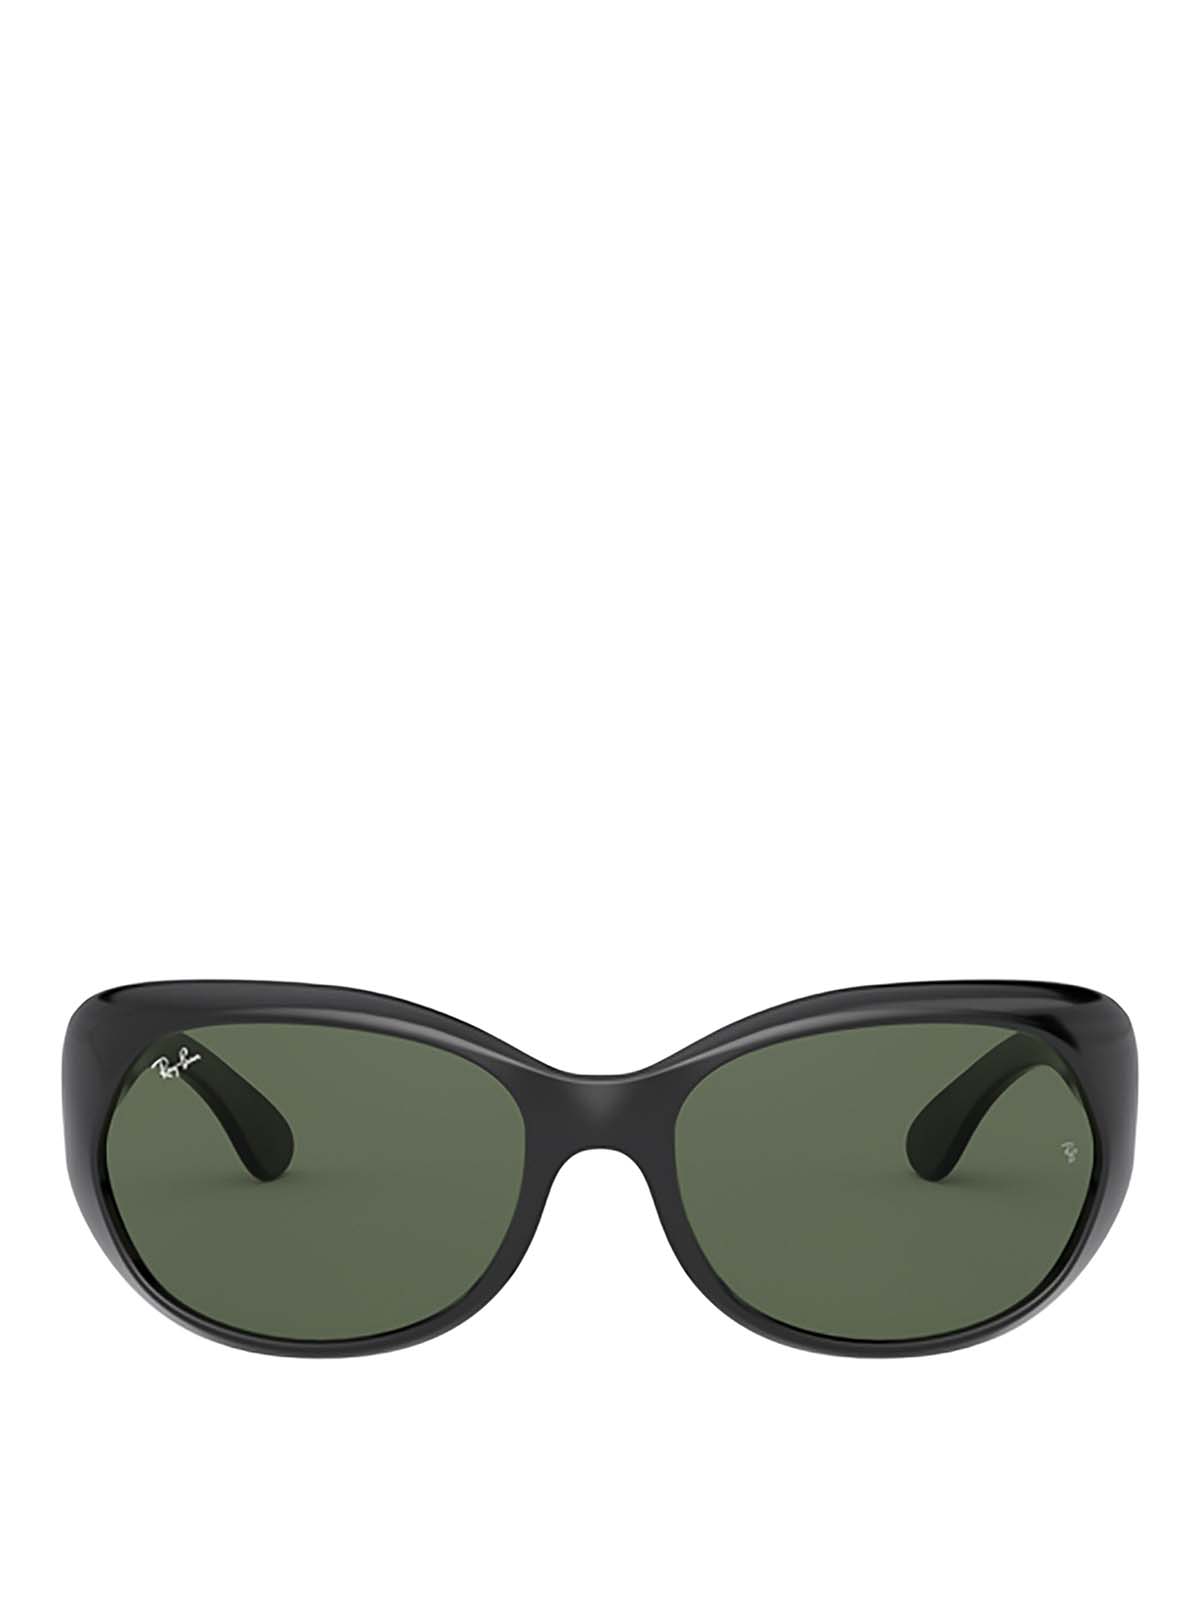 Ray Ban - RB4325 butterfly shape 